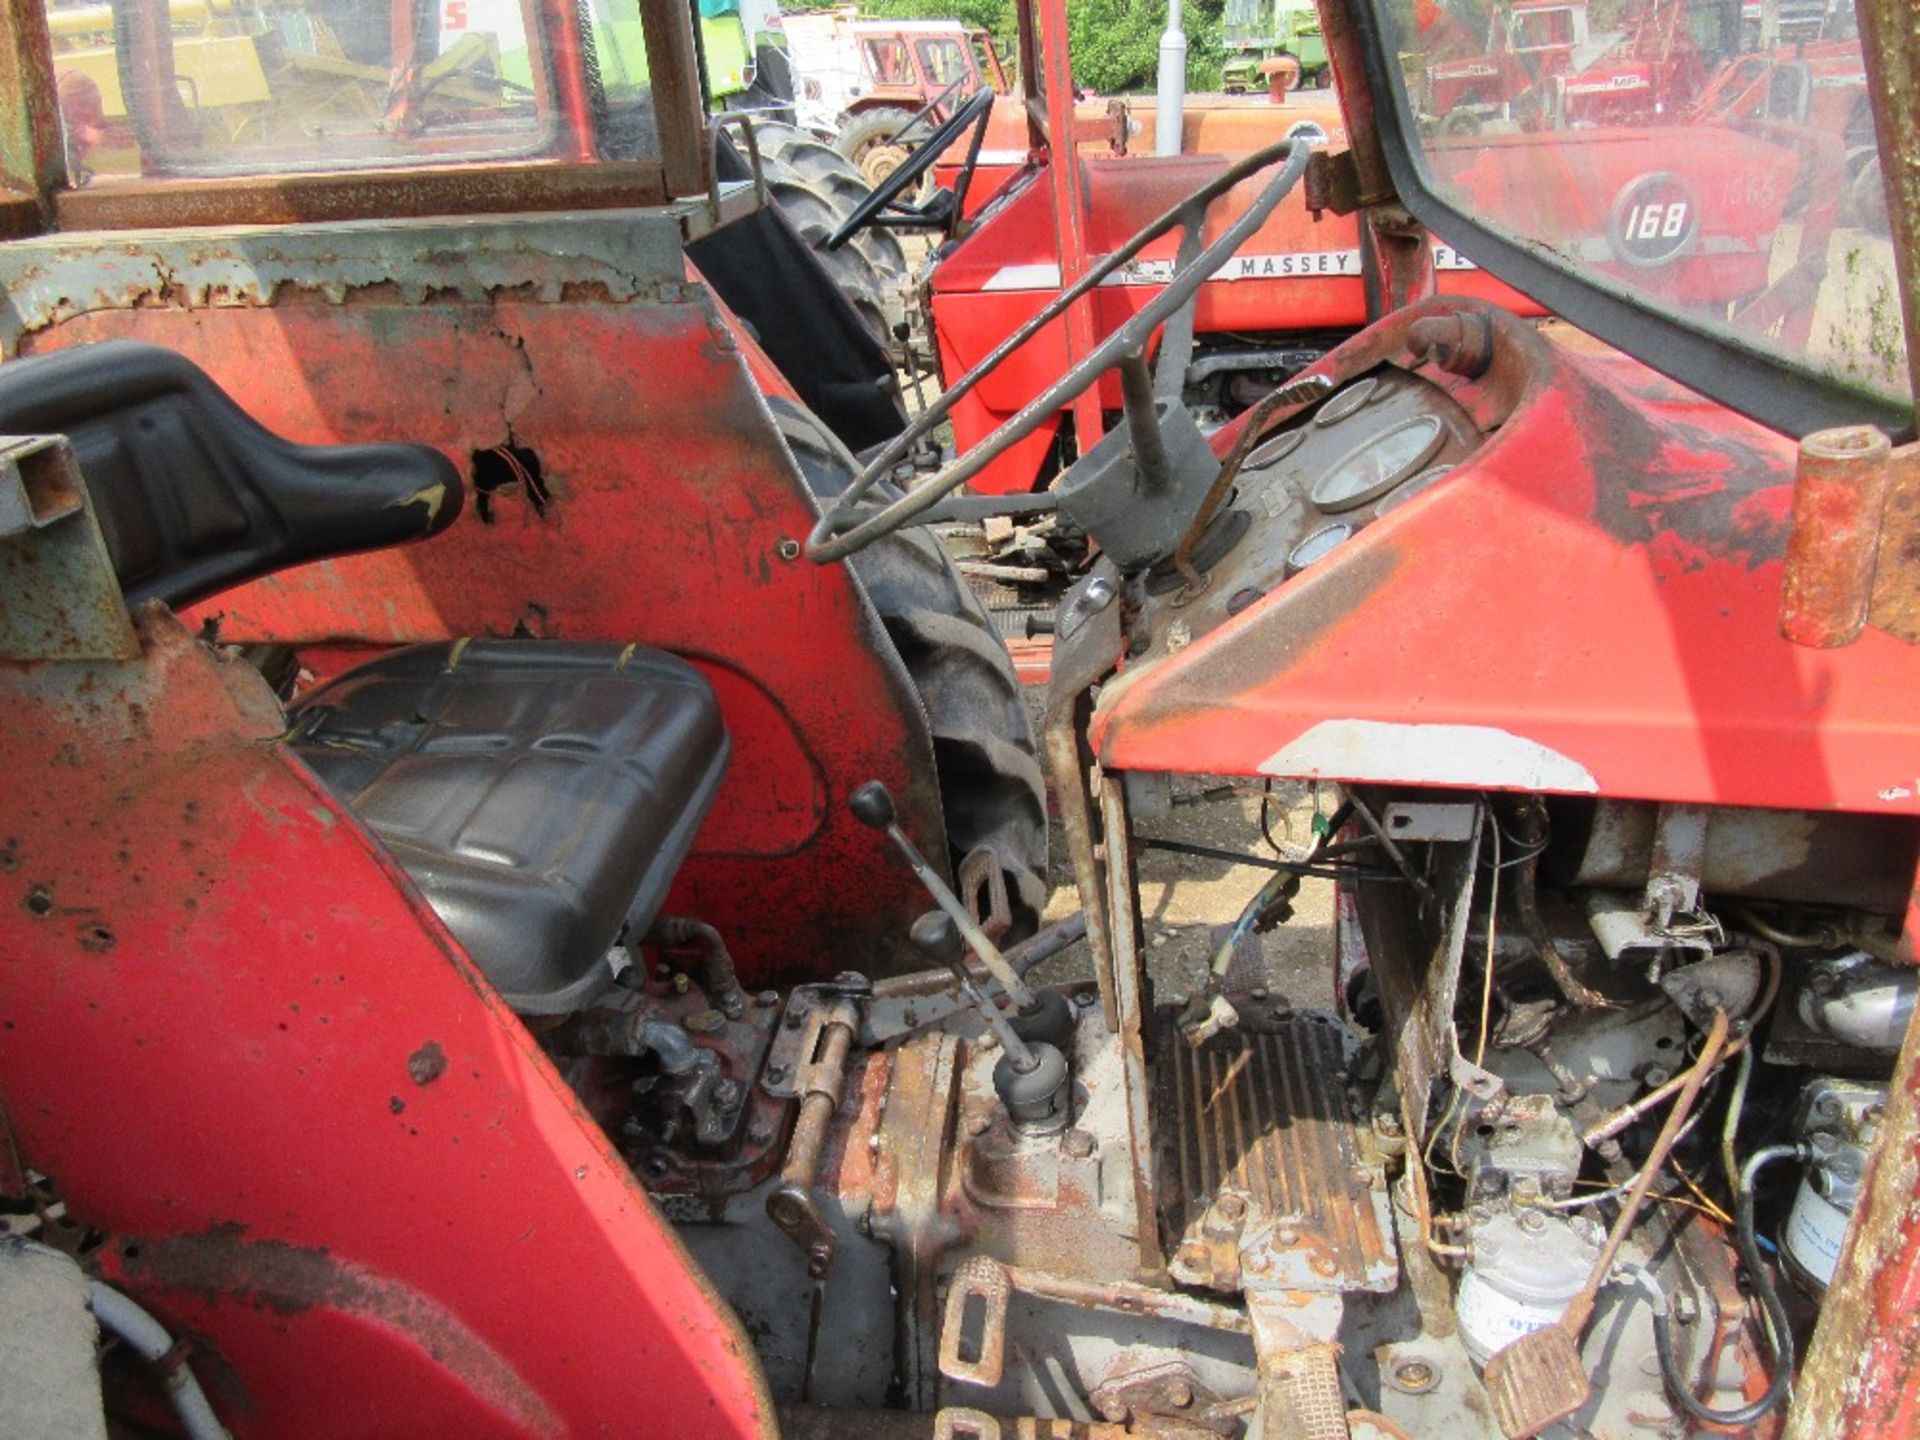 Massey Ferguson 165 Tractor with Square Axle - Image 2 of 6